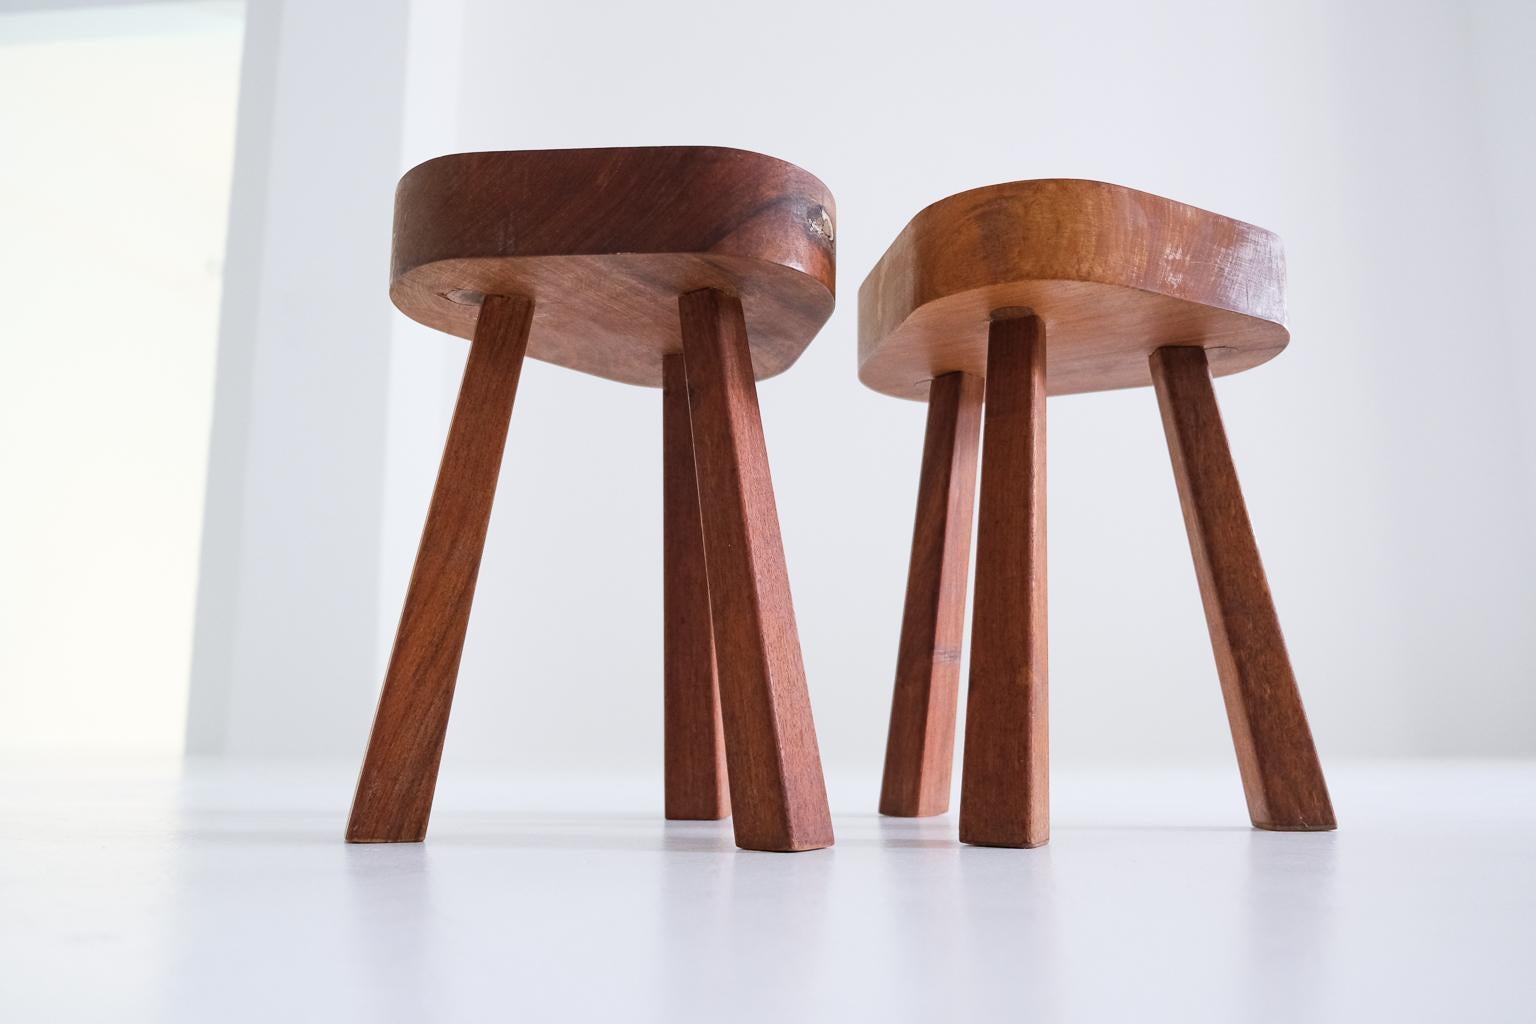 A pair of stools that can be used even better as small side tables. Made of solid wood, the design is reminiscent of the work of Charlotte Perriand or Pierre Chapo. 

Slight signs of use on the surface. 